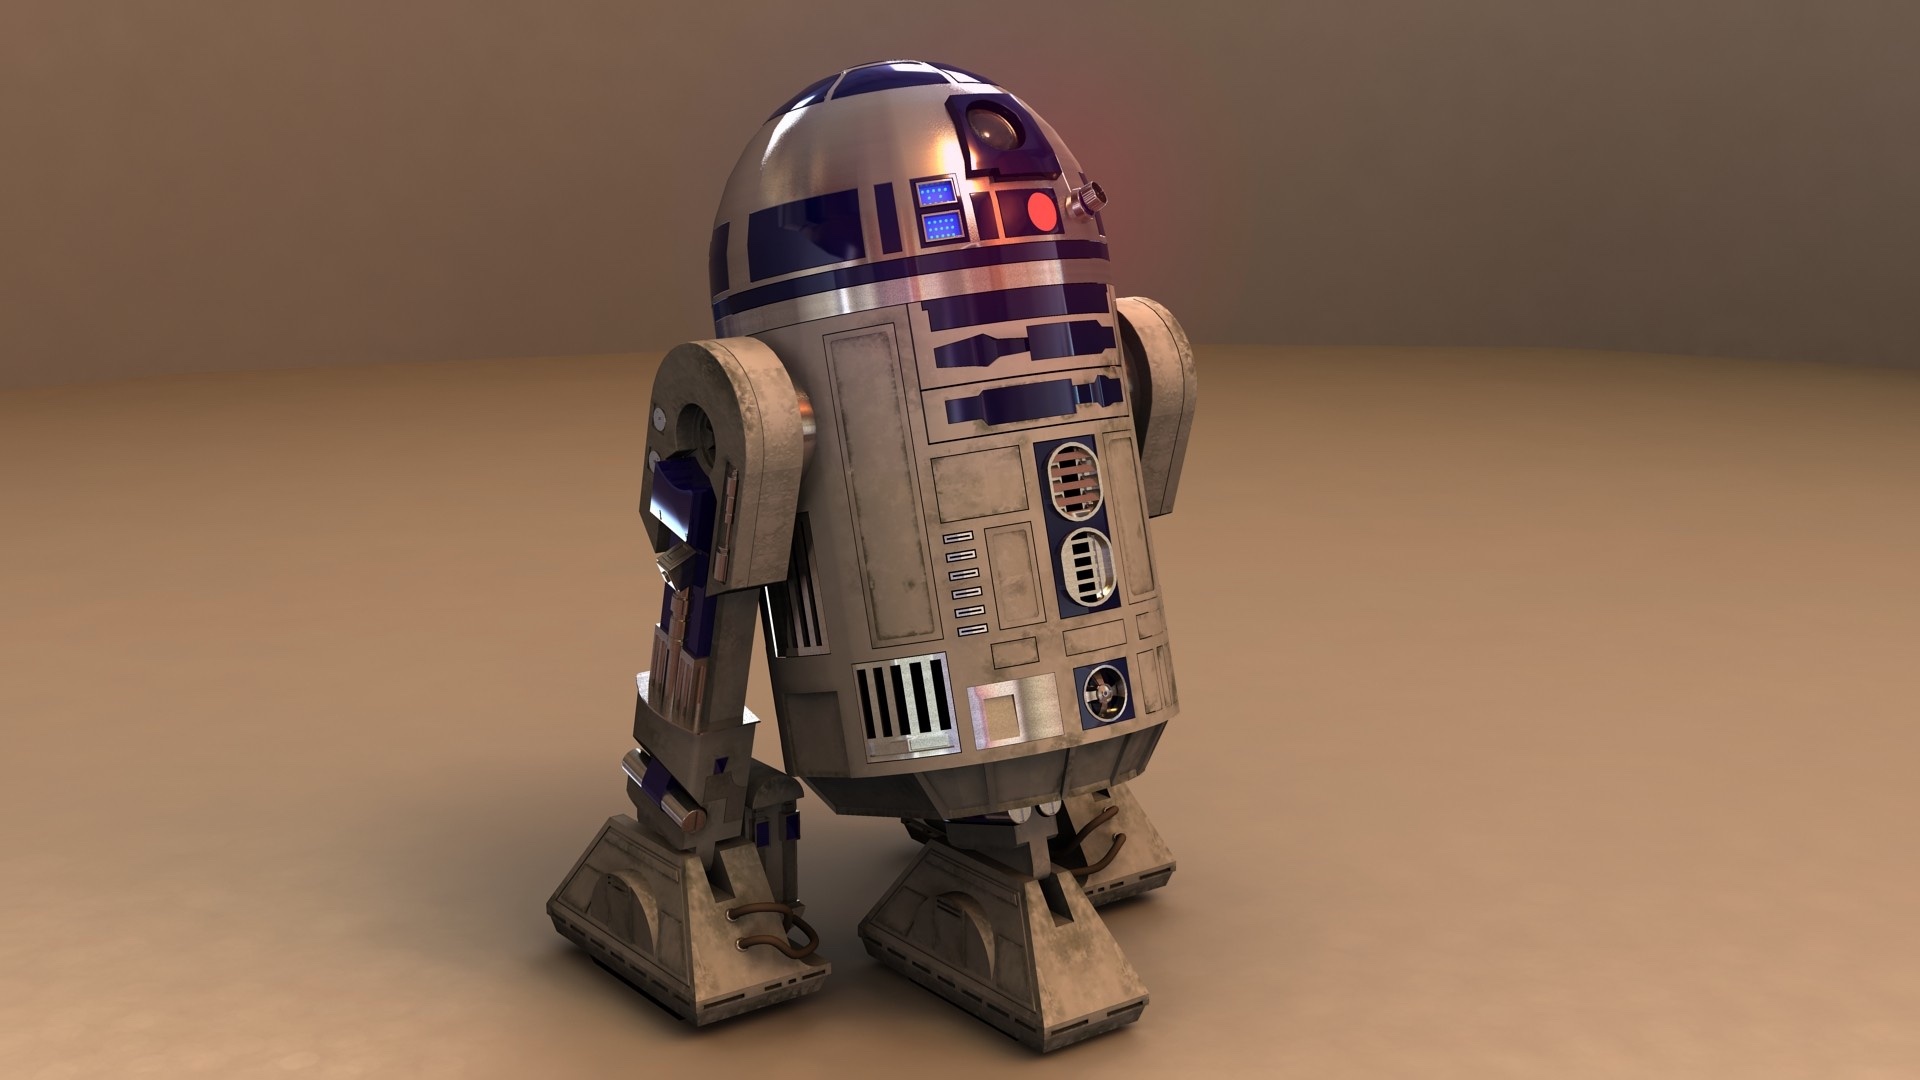 R2-D2 from Star Wars. Image credit: http://preview.turbosquid.com/Preview/2014/07/11__11_24_34/Textured2.jpg183b598c-faf6-4f34-a025-5bbb19571f9bOriginal.jpg